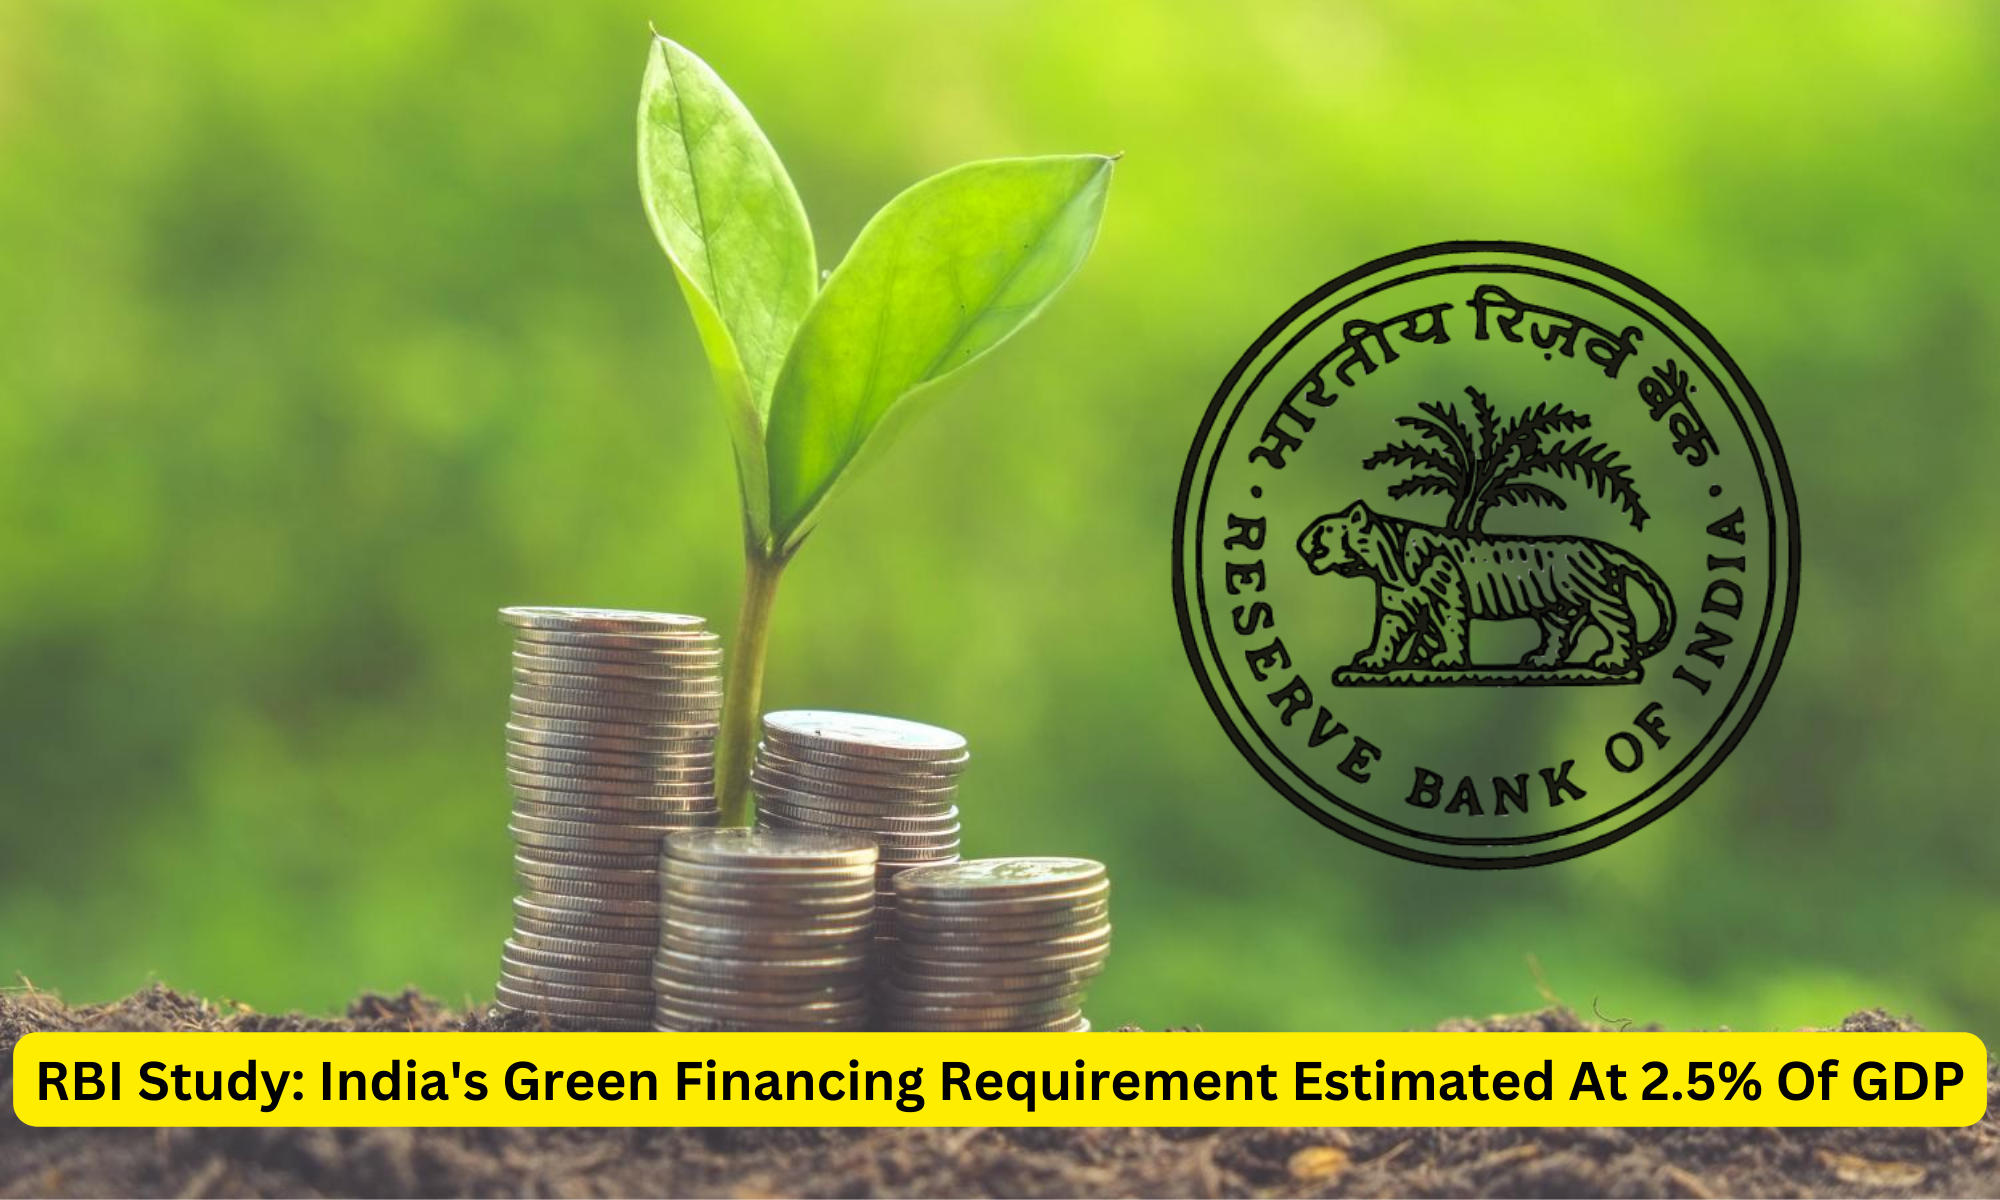 RBI Study: India's Green Financing Requirement Estimated At 2.5% Of GDP